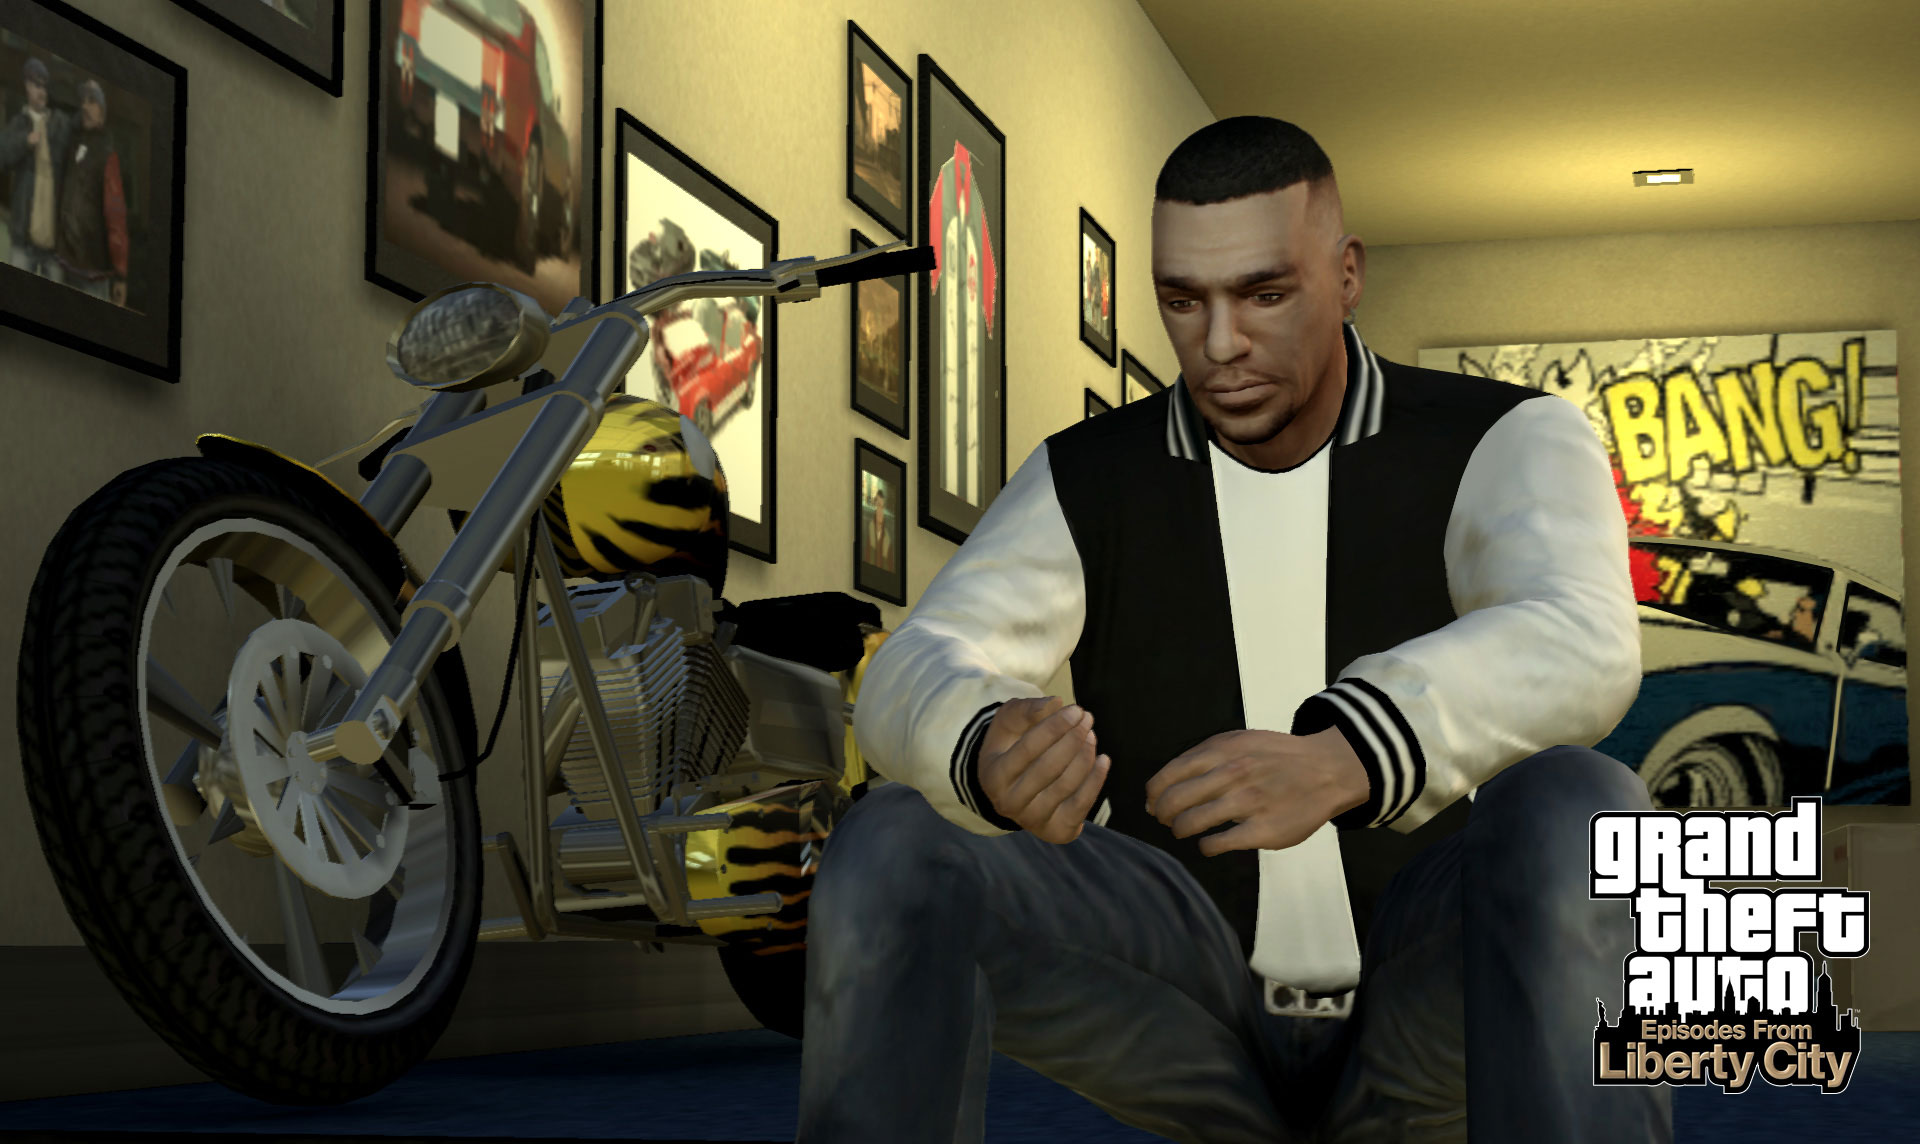 Grand theft auto iv episodes from liberty city save game pc